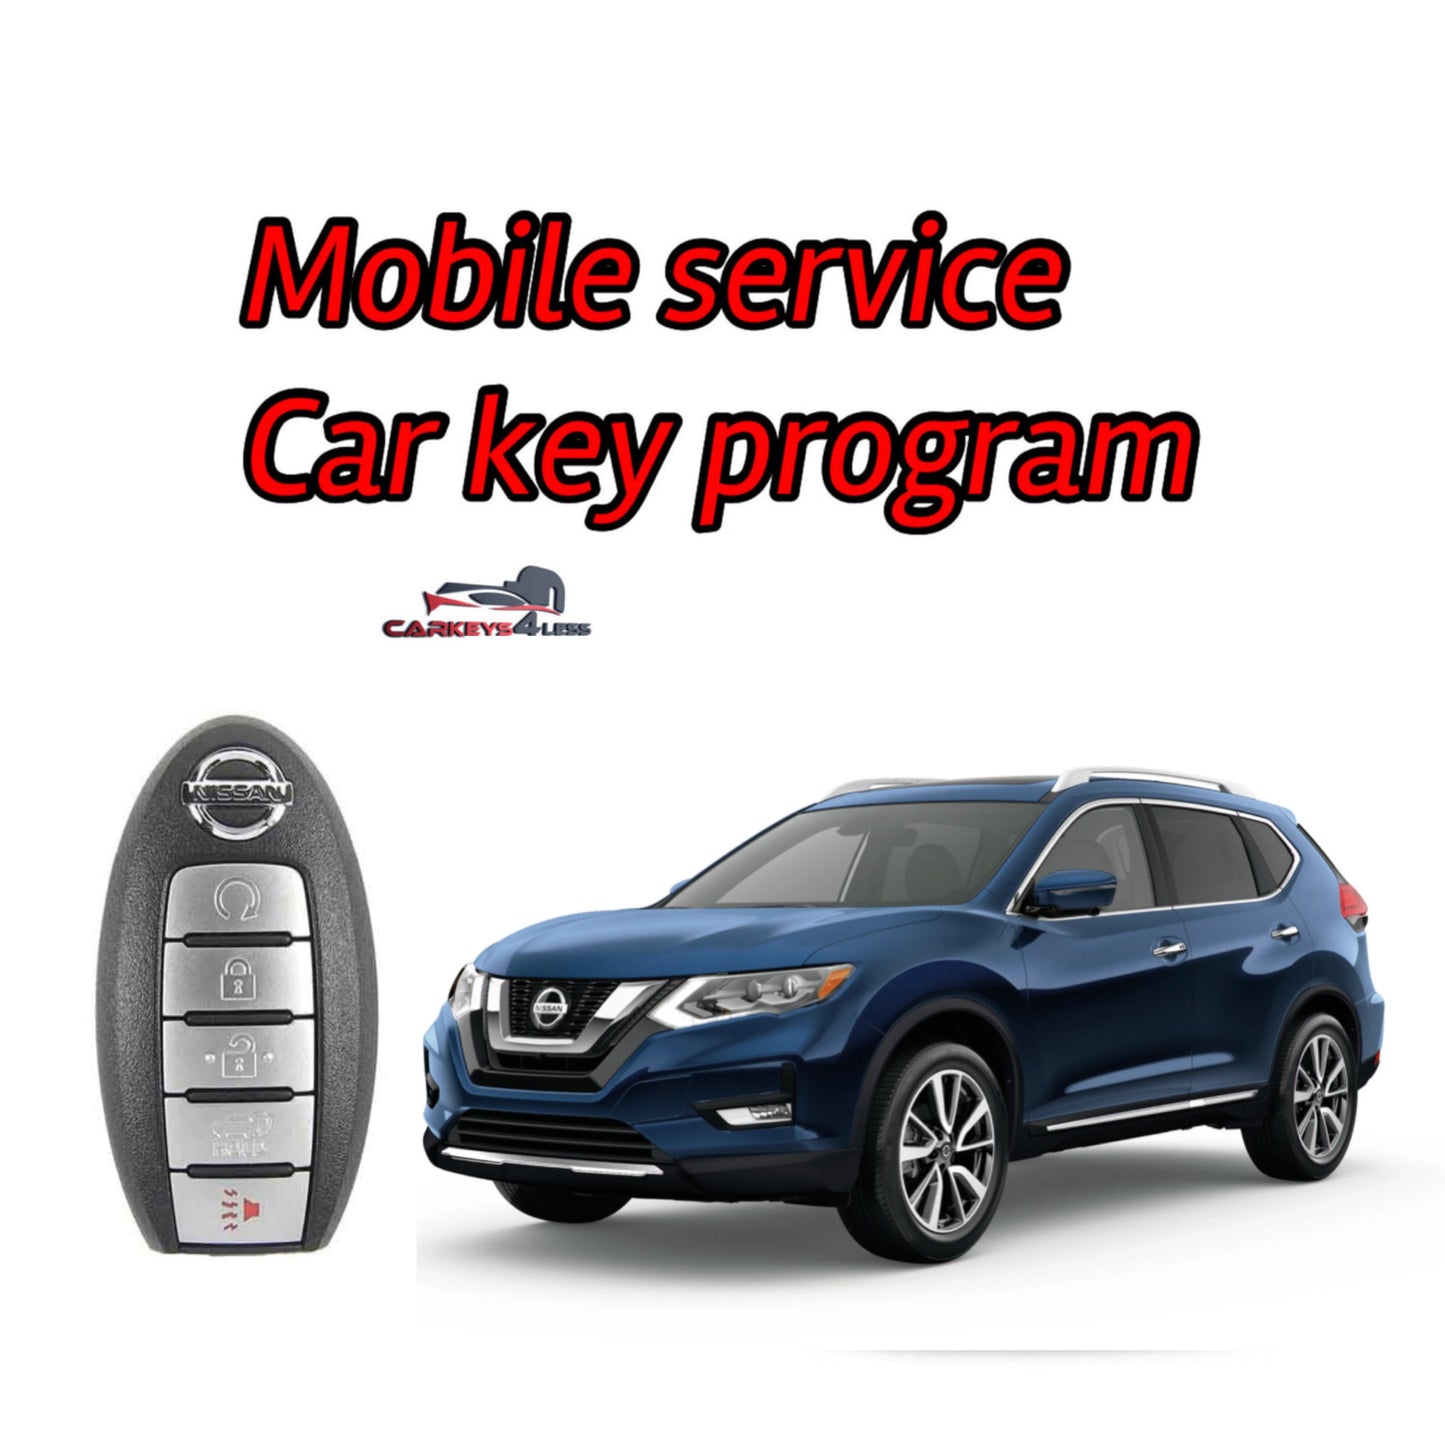 Mobile service for an oem refurbished nissan car key replacement